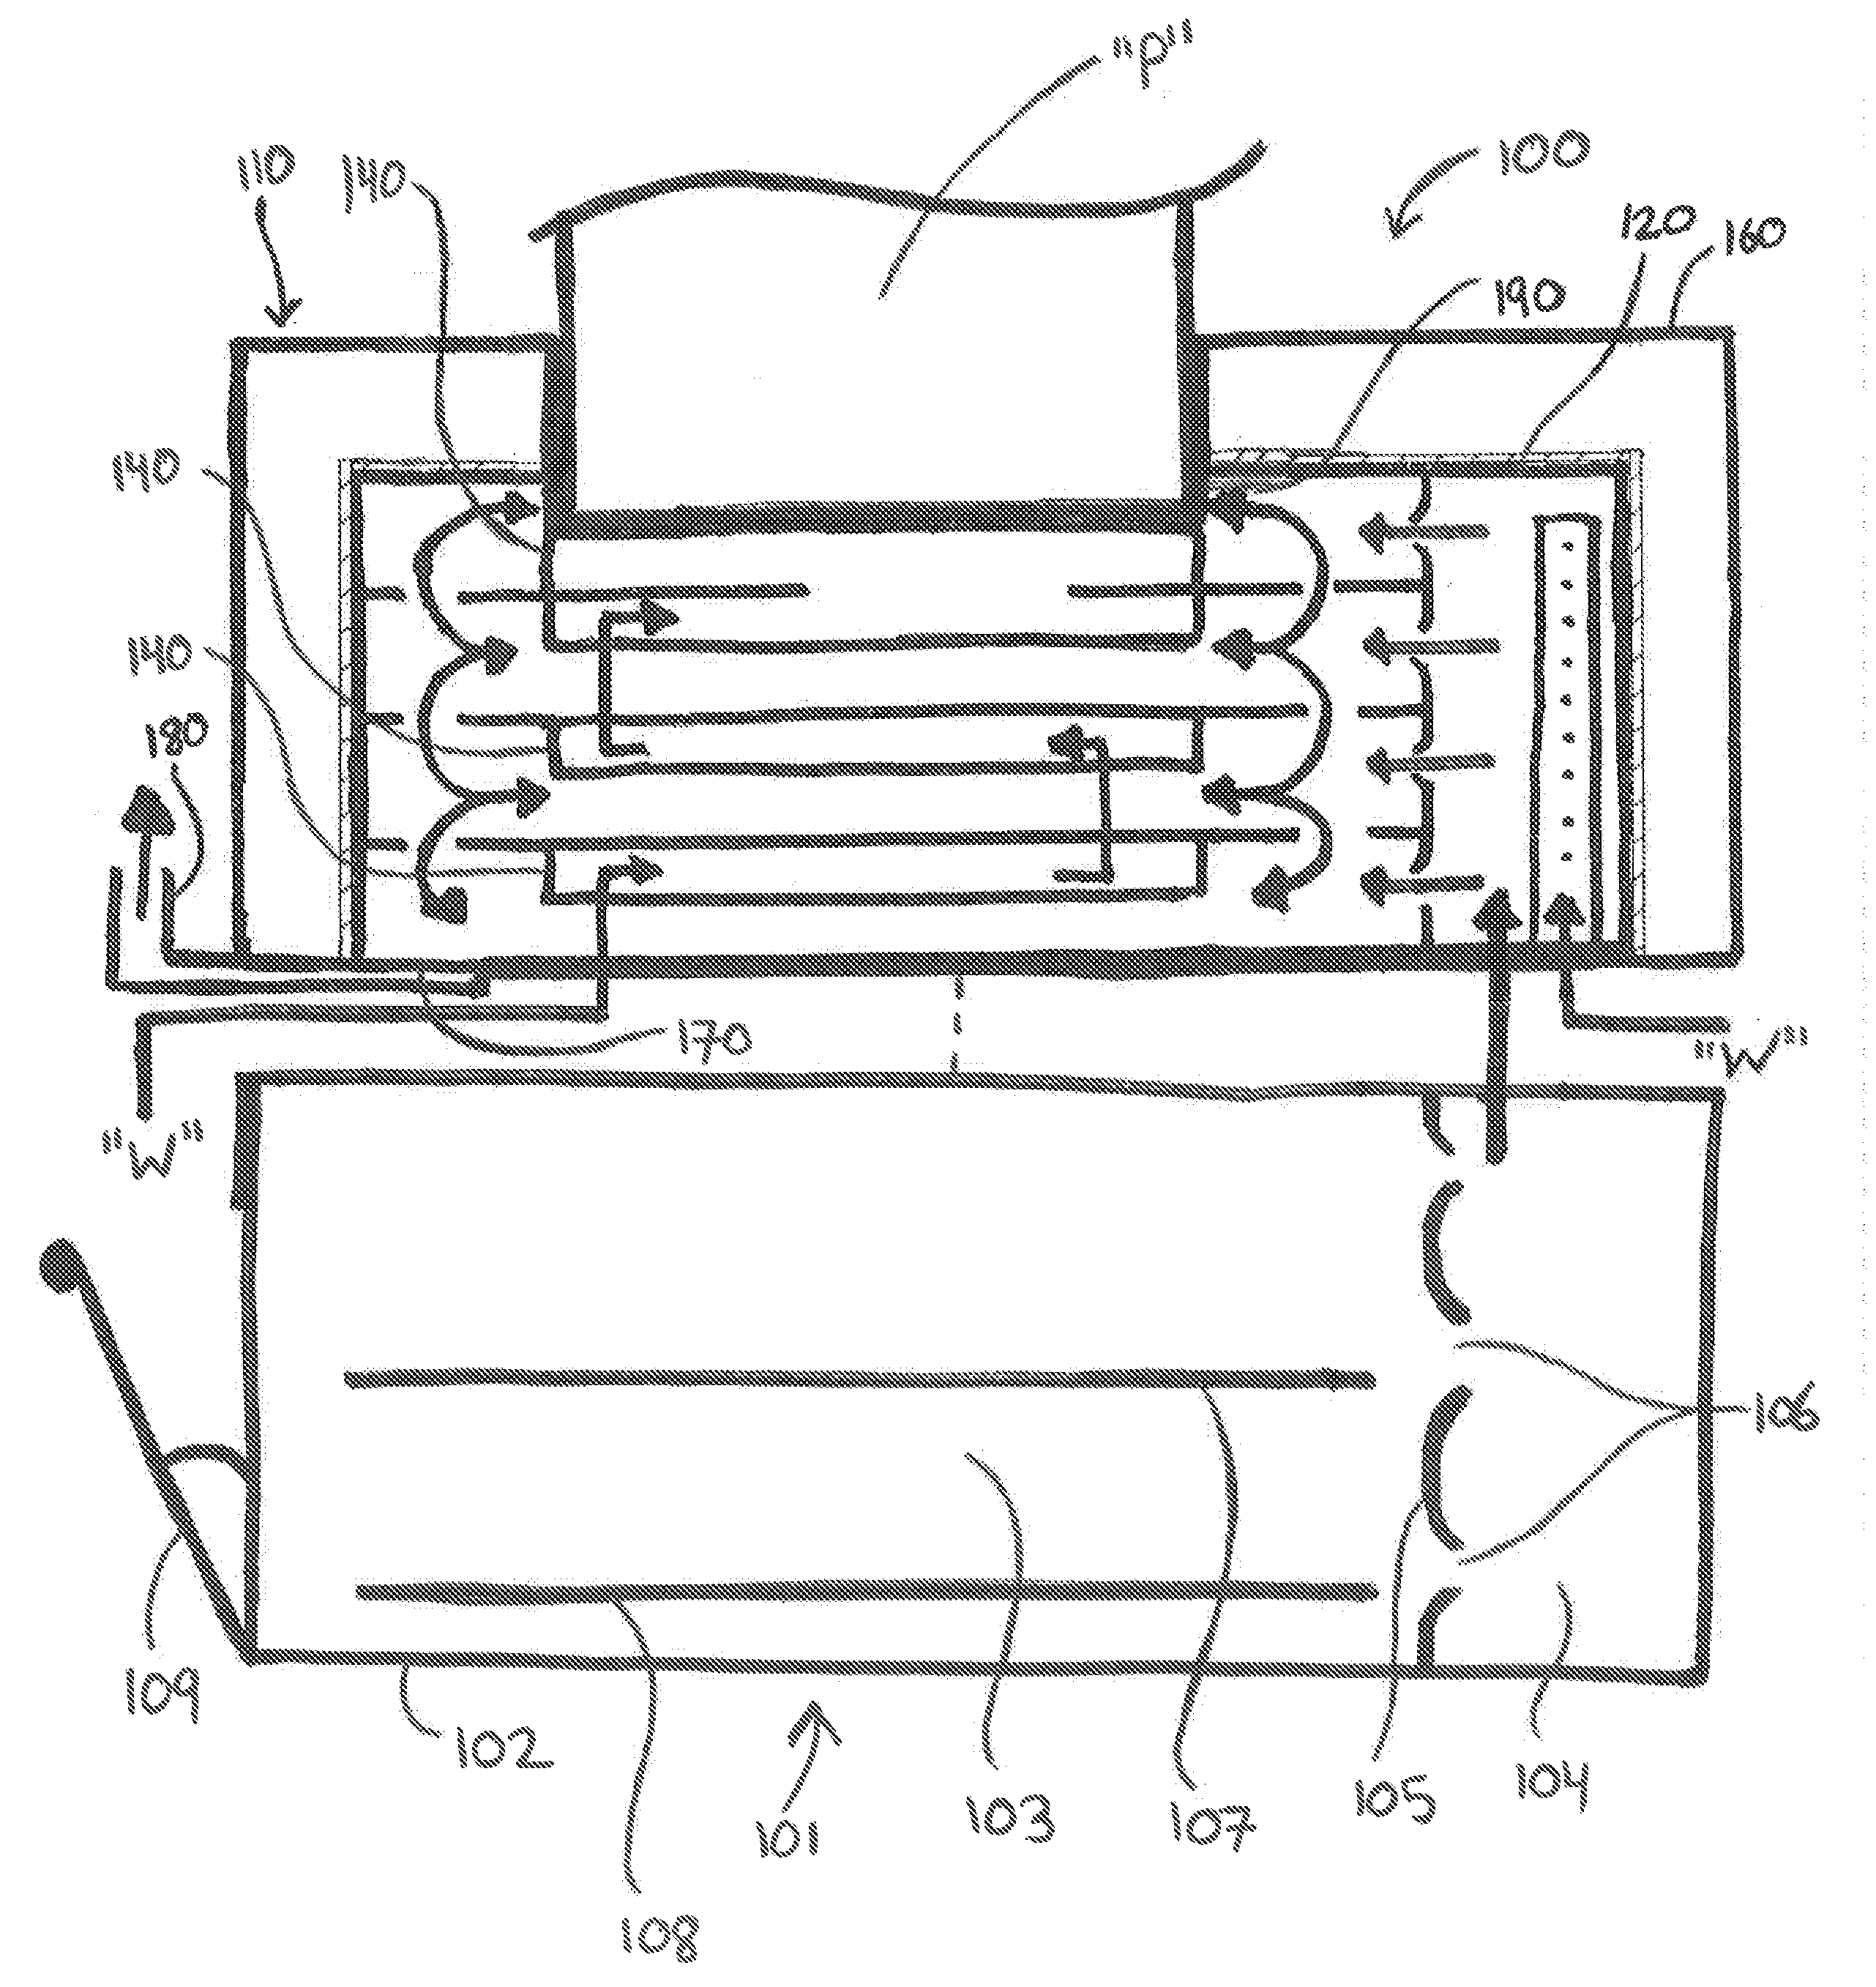 Heat exchangers, boilers, and systems incorporating the same